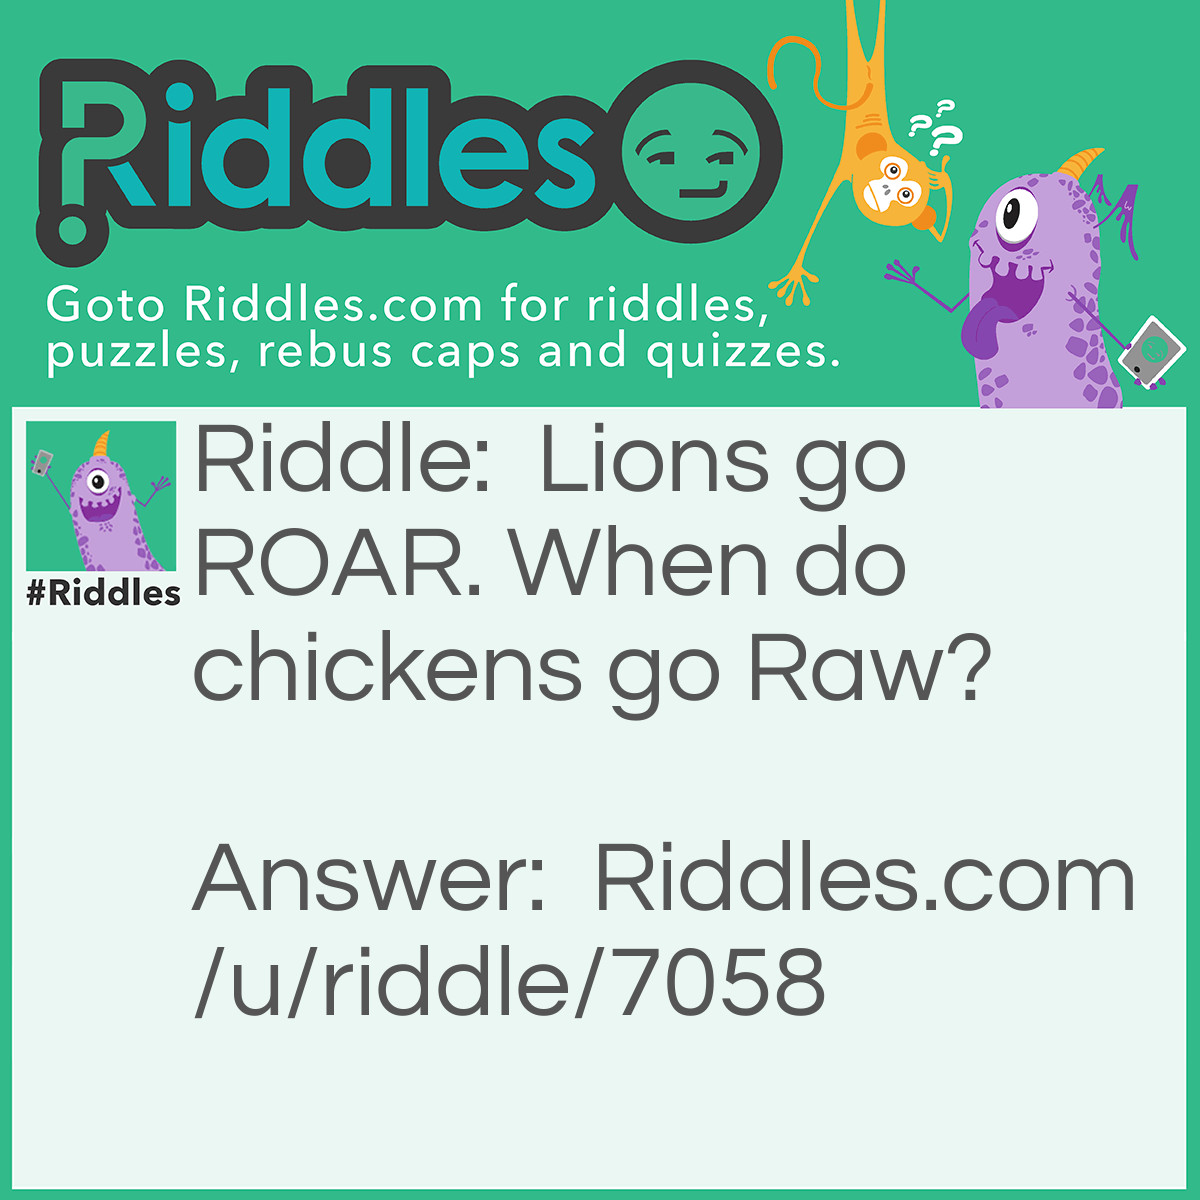 Riddle: Lions go ROAR. When do chickens go Raw? Answer: After they're killed, but before they're fried or cooked.